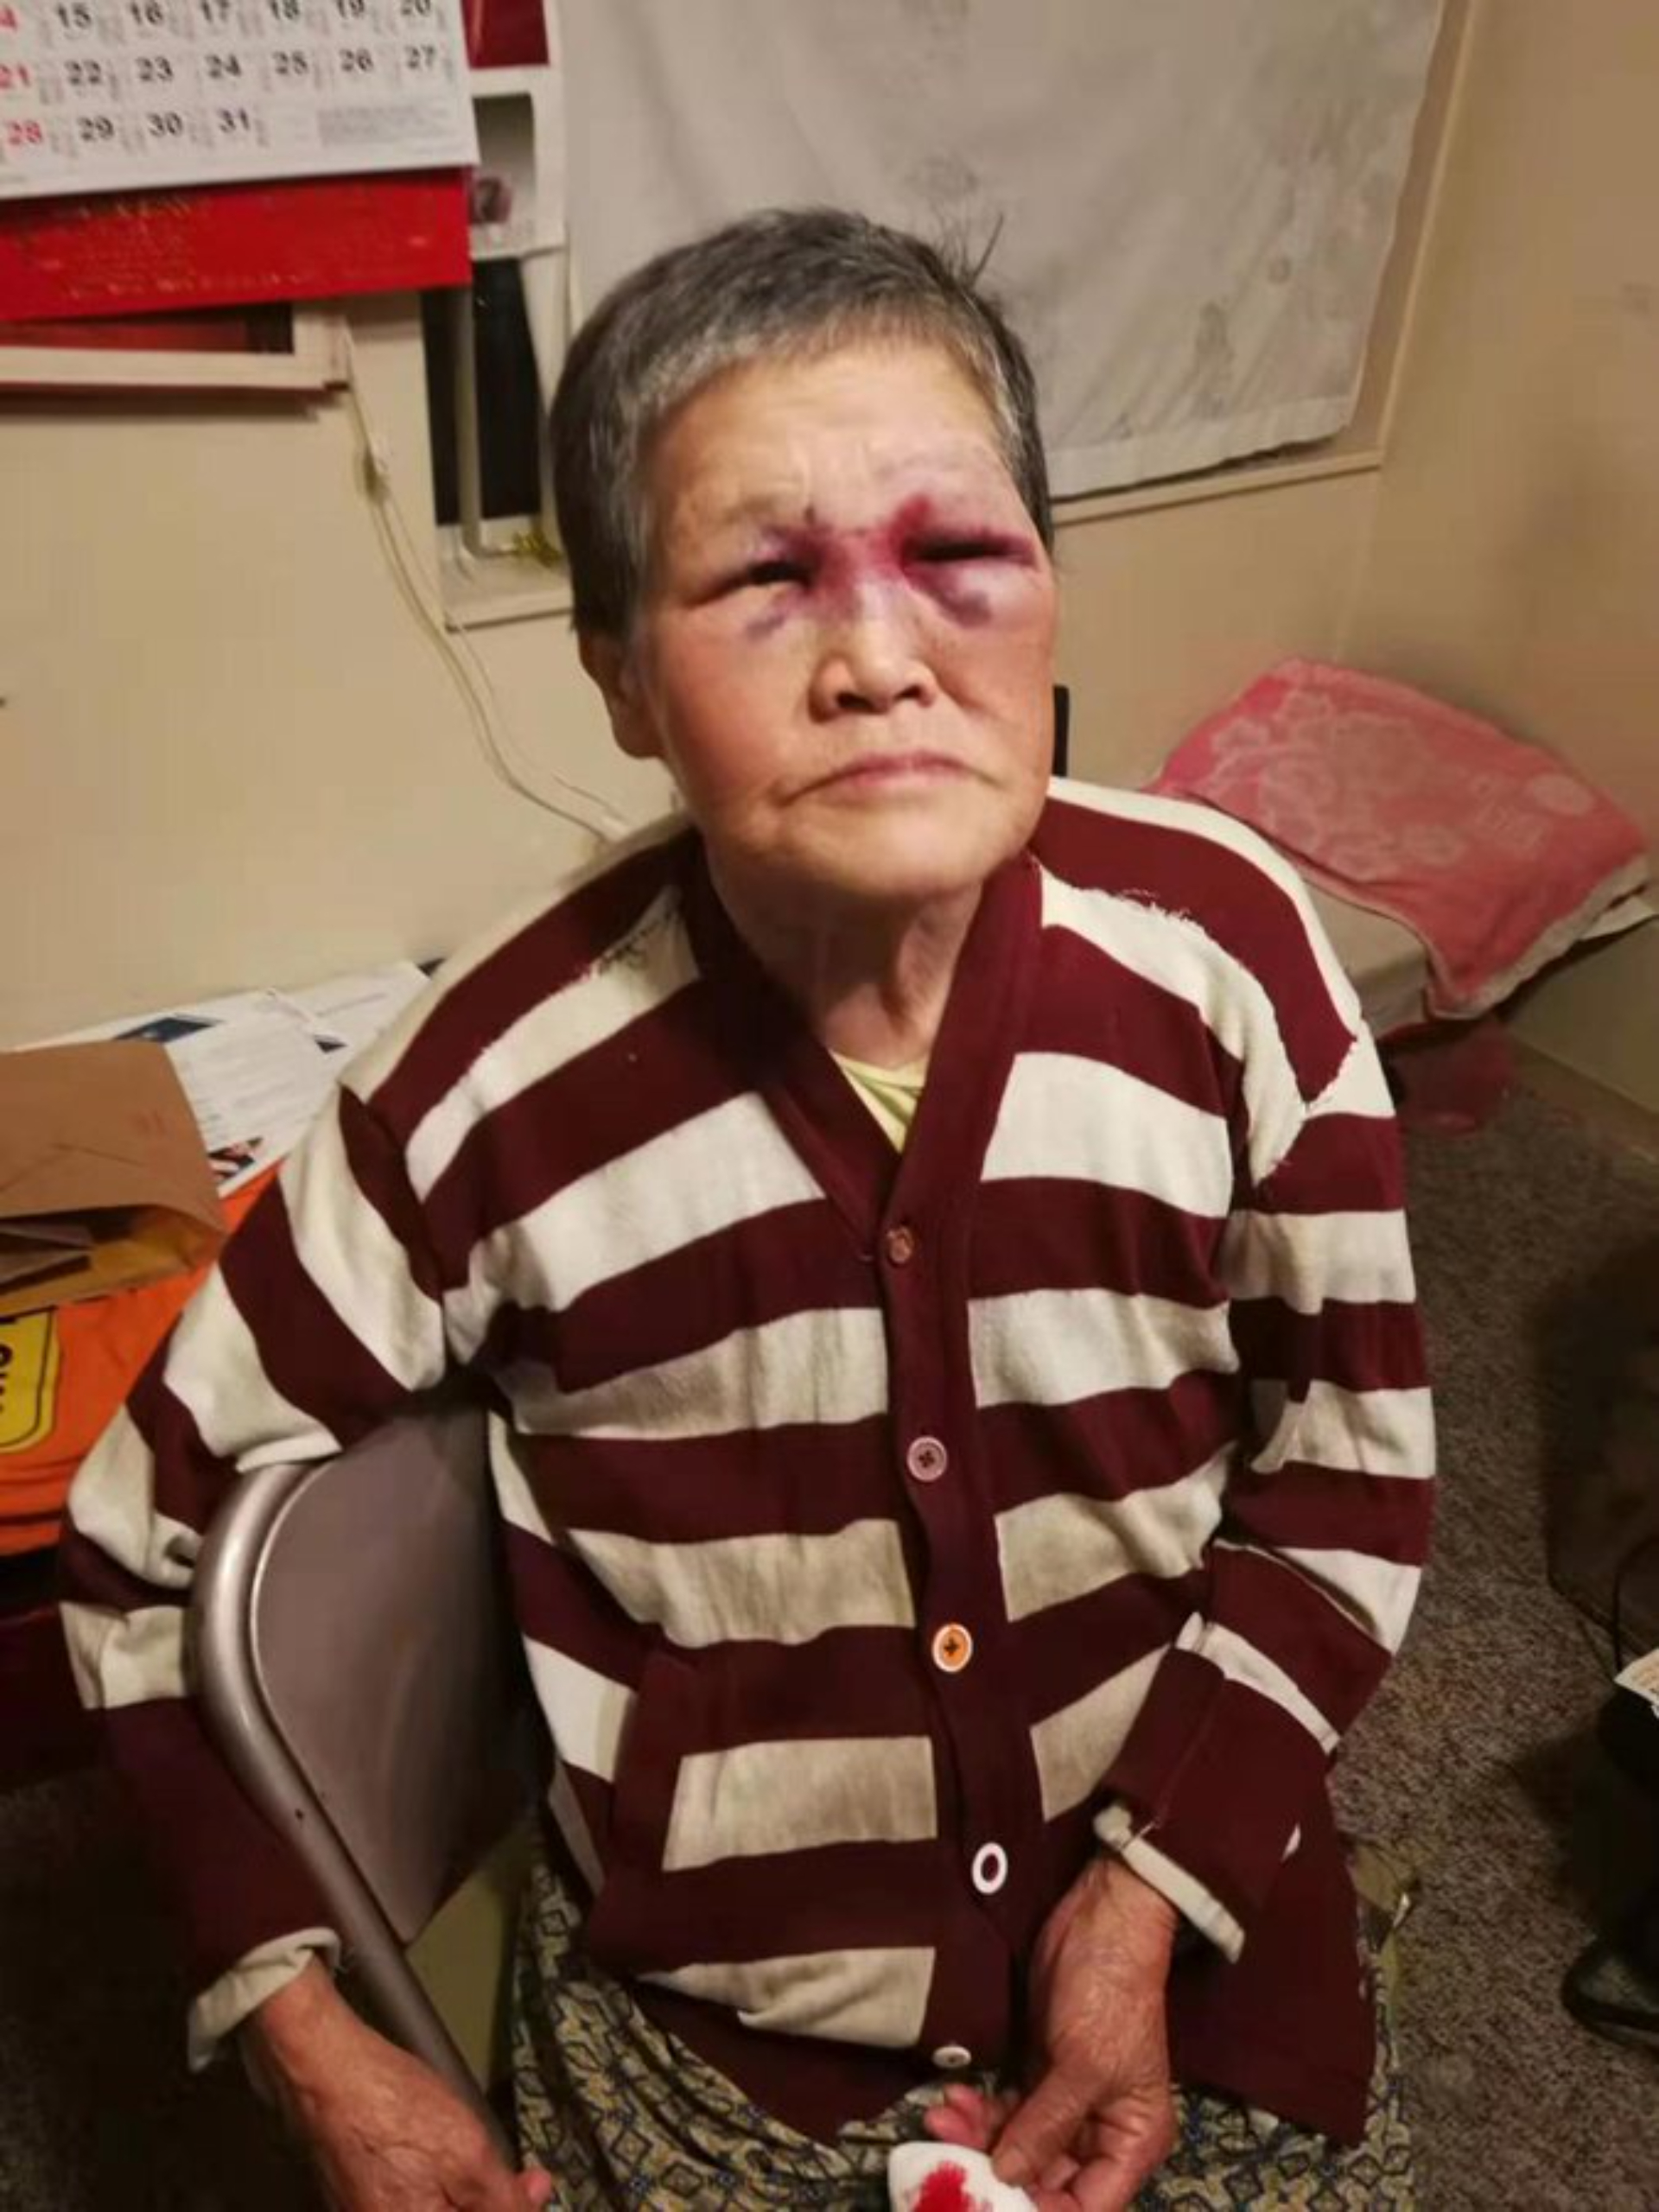 A senior woman, who is Asian, poses for a photo in a red and white striped shirt, she has an injured eye and face.